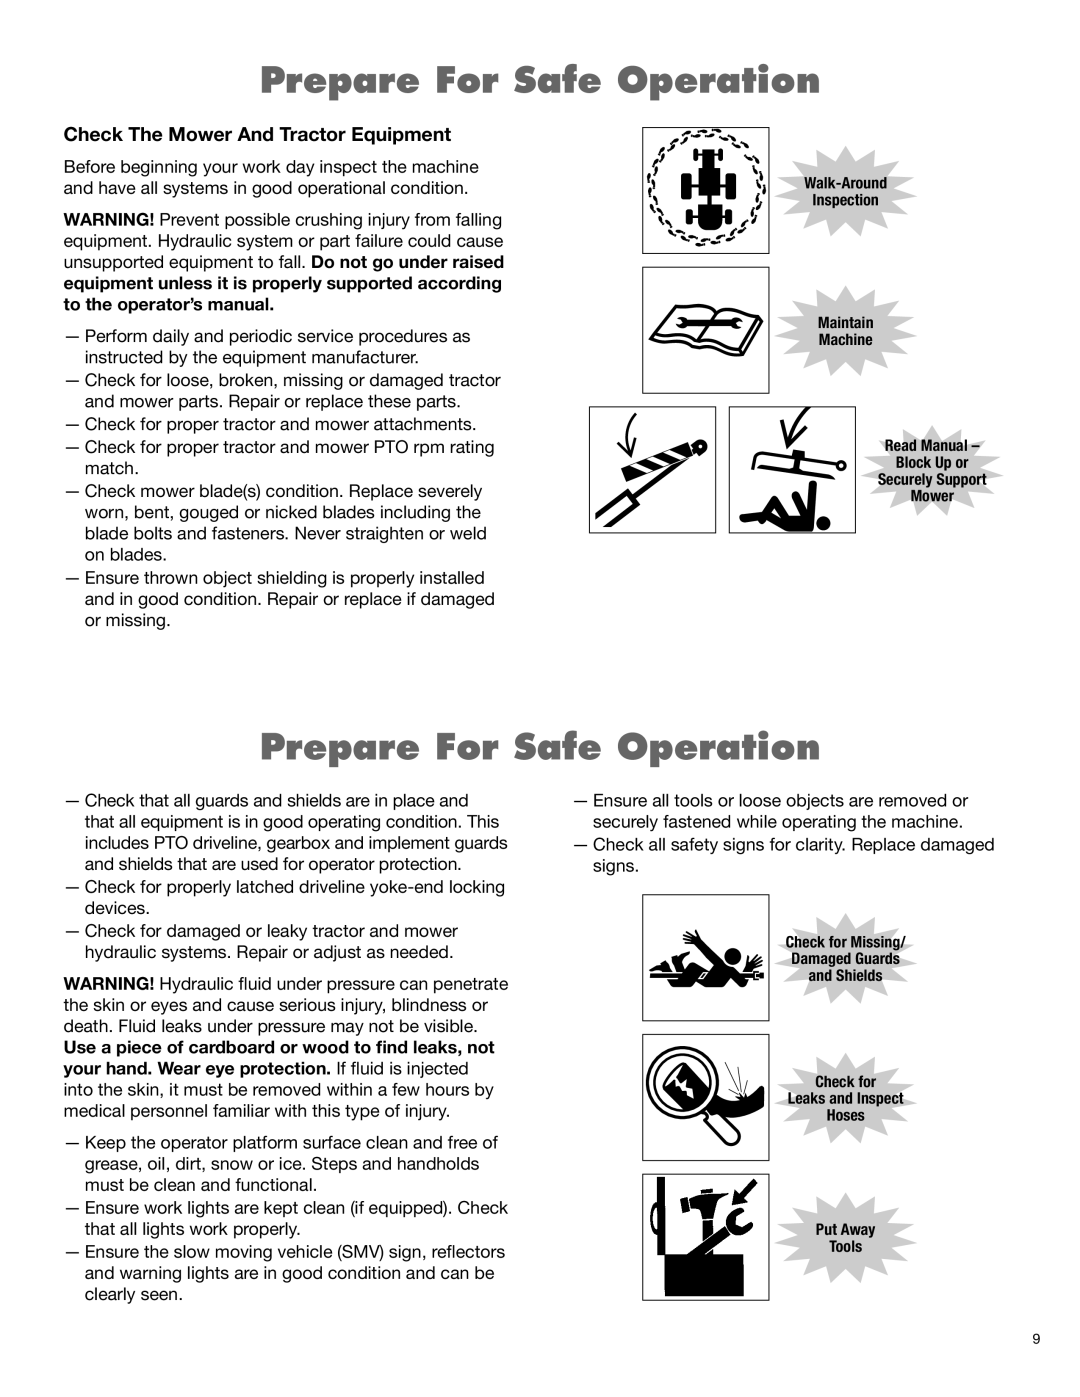 Alamo 1900 manual Prepare For Safe Operation, Check The Mower And Tractor Equipment 